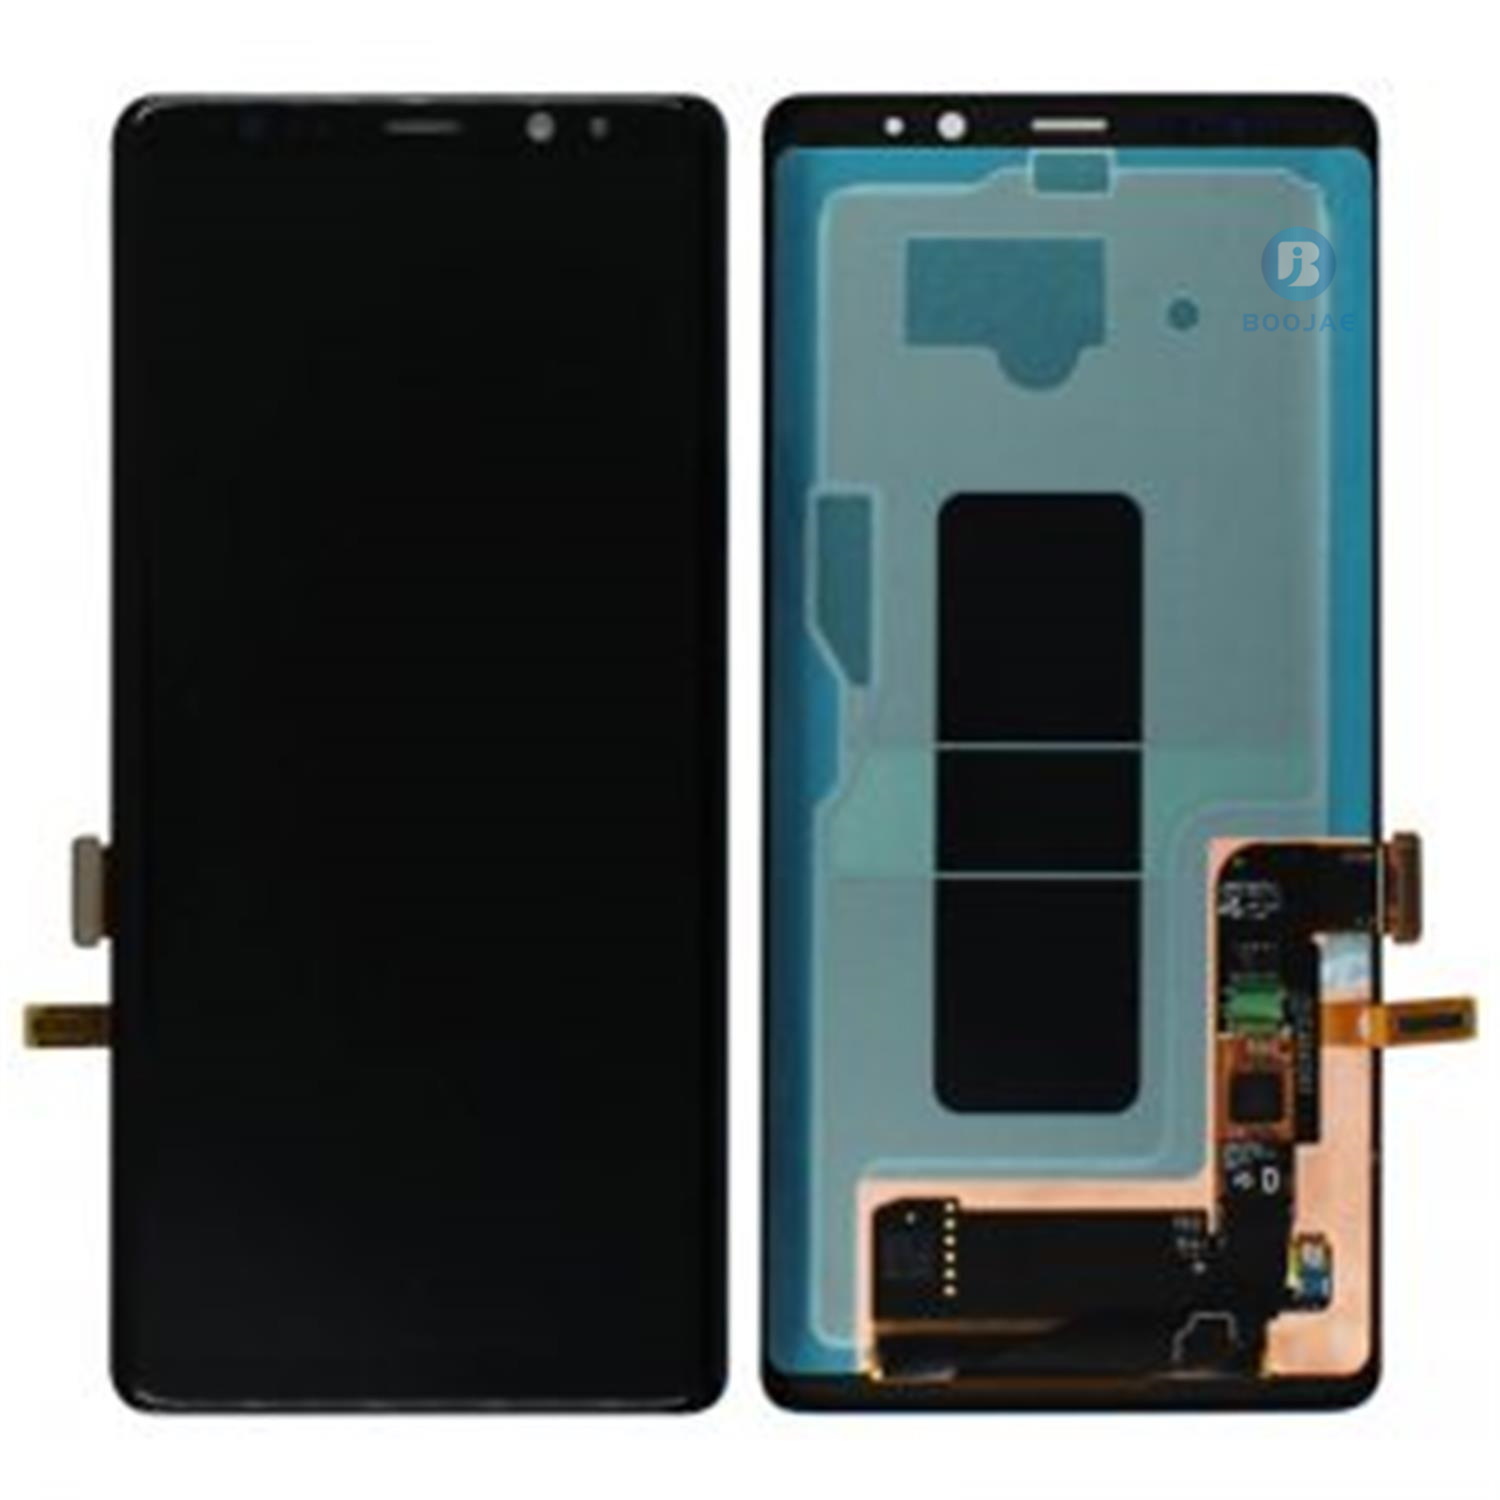 Samsung Galaxy Note 9 LCD Screen Display and Touch Panel Digitizer Assembly Replacement